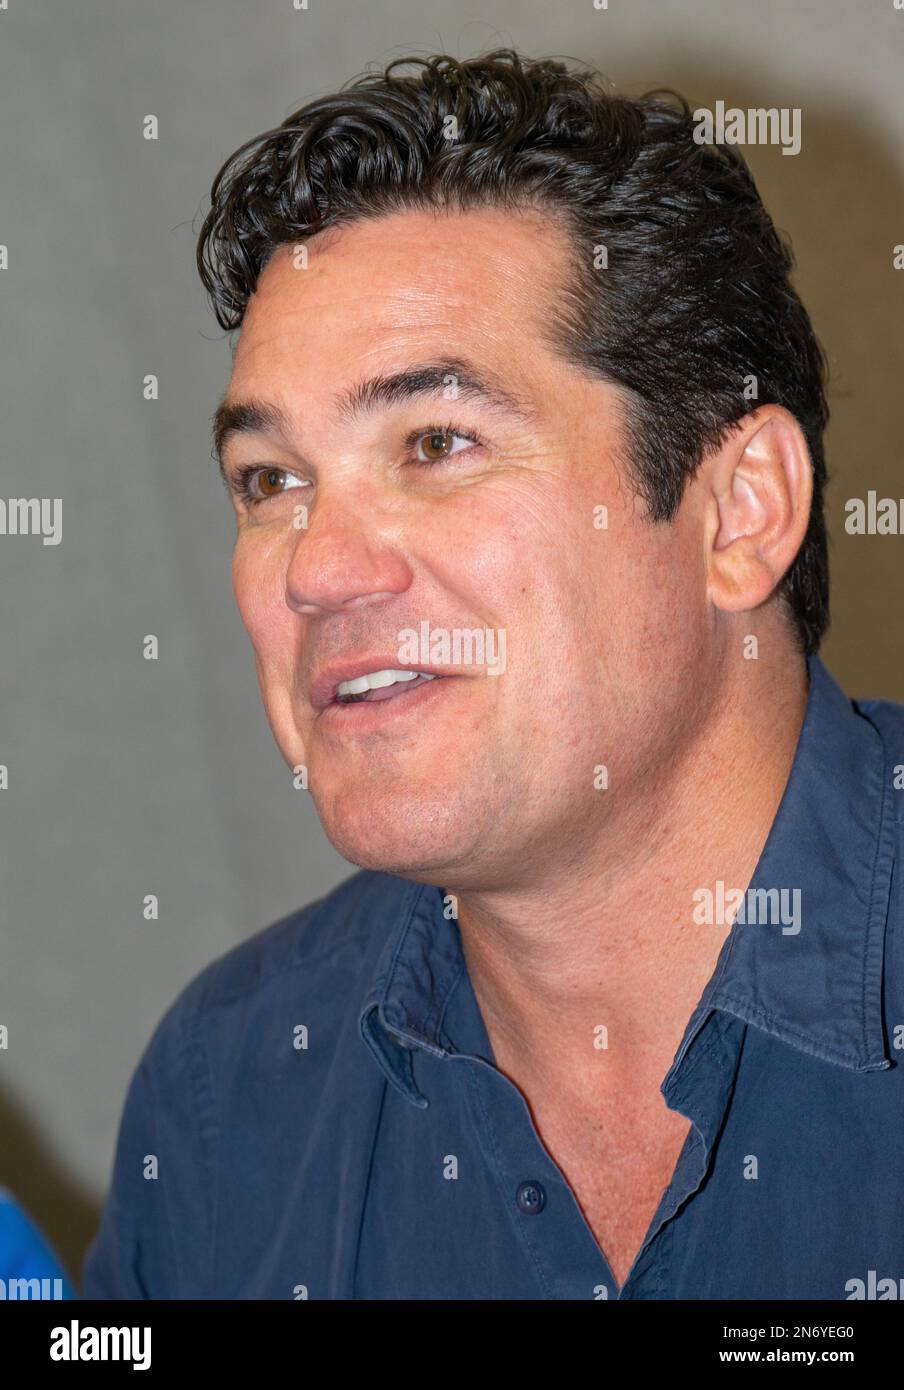 Portrait of American actor Dean Cain, attending the 2017 London Film Comic Con as a guest signer, at the Olympia London exhibition and event venue. Stock Photo